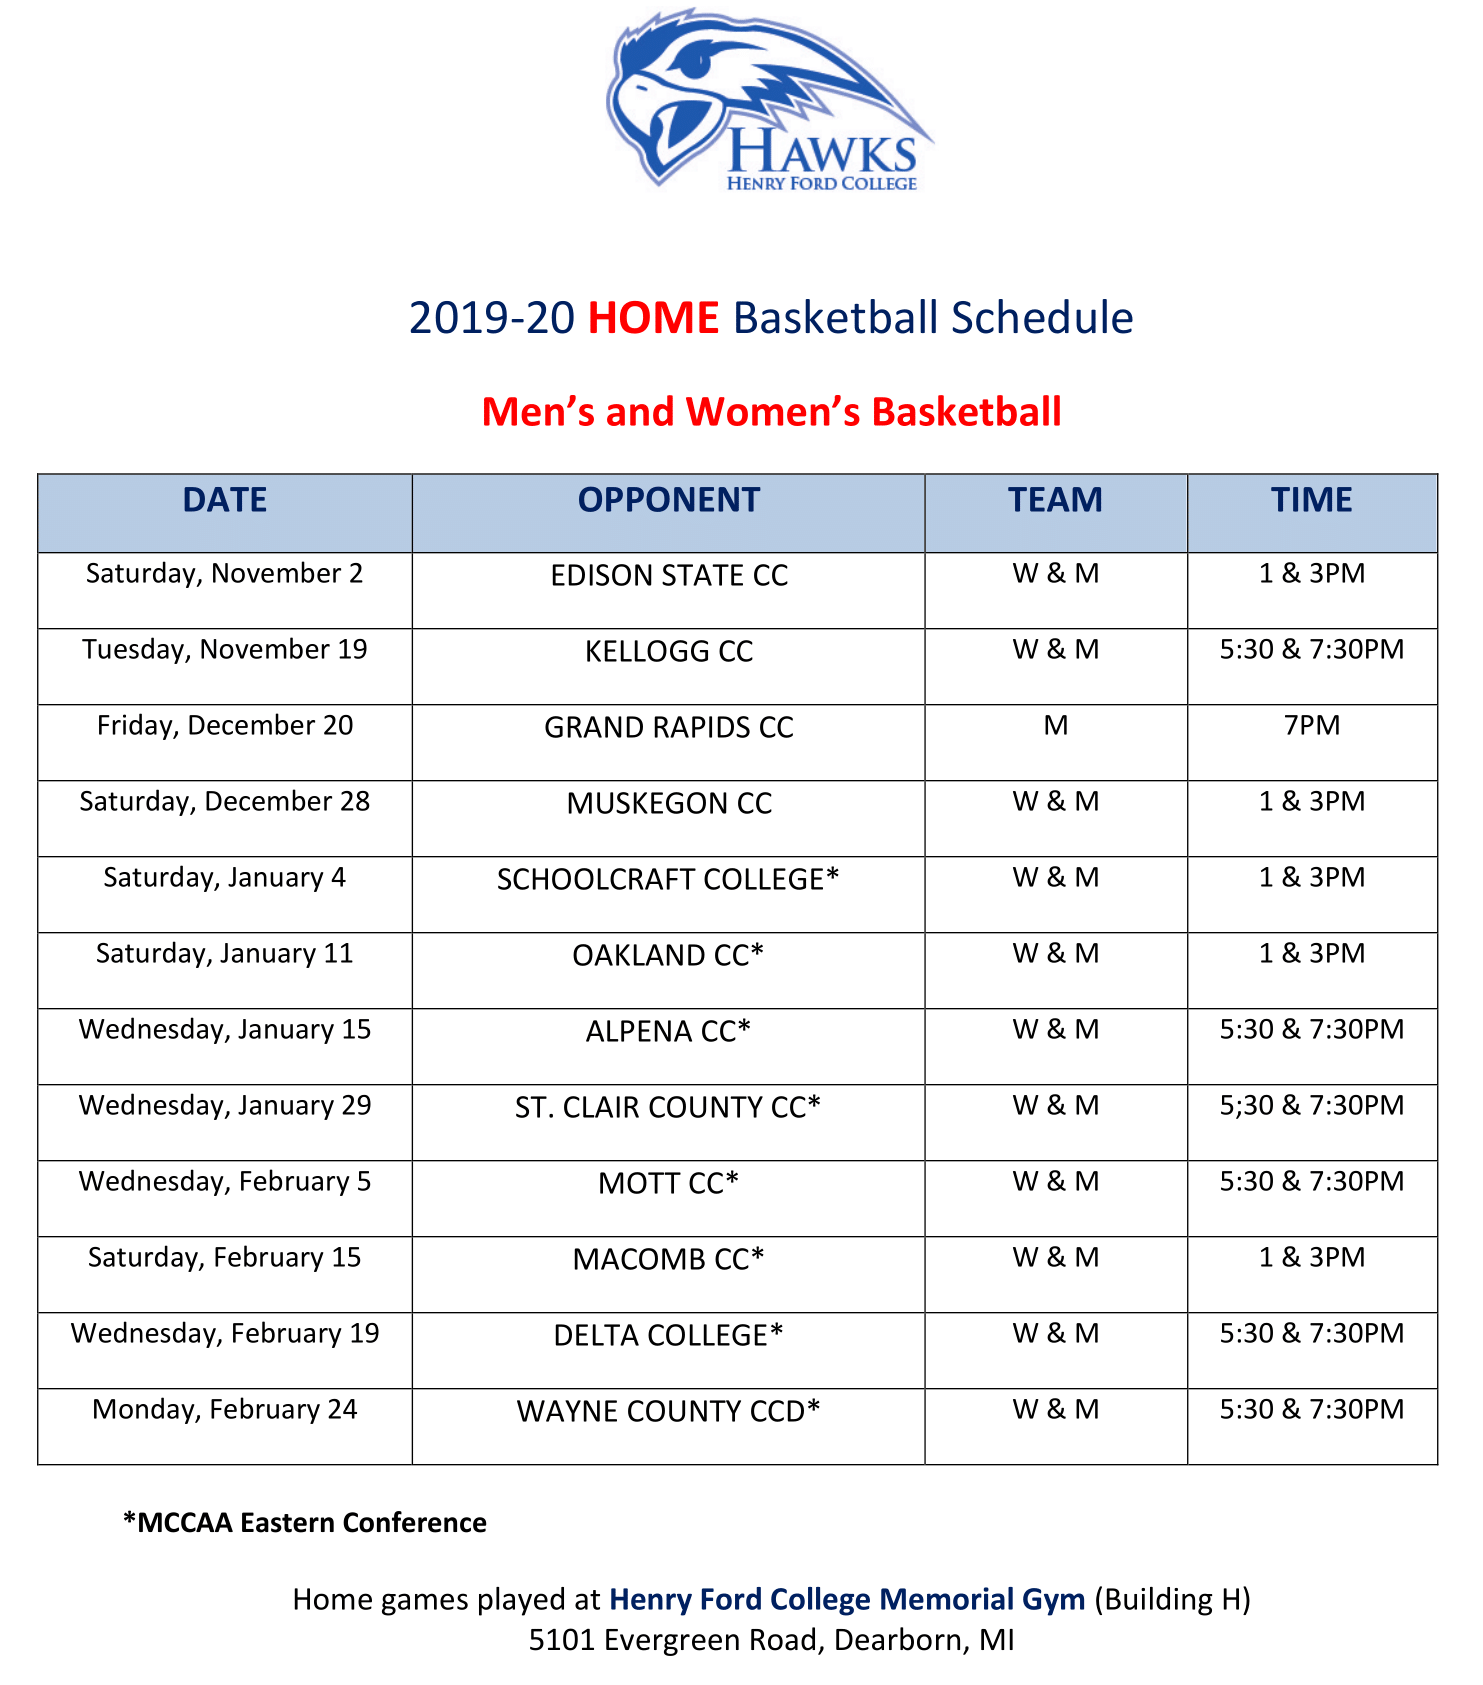 Image shows the HFC men and women's basketball season schedule